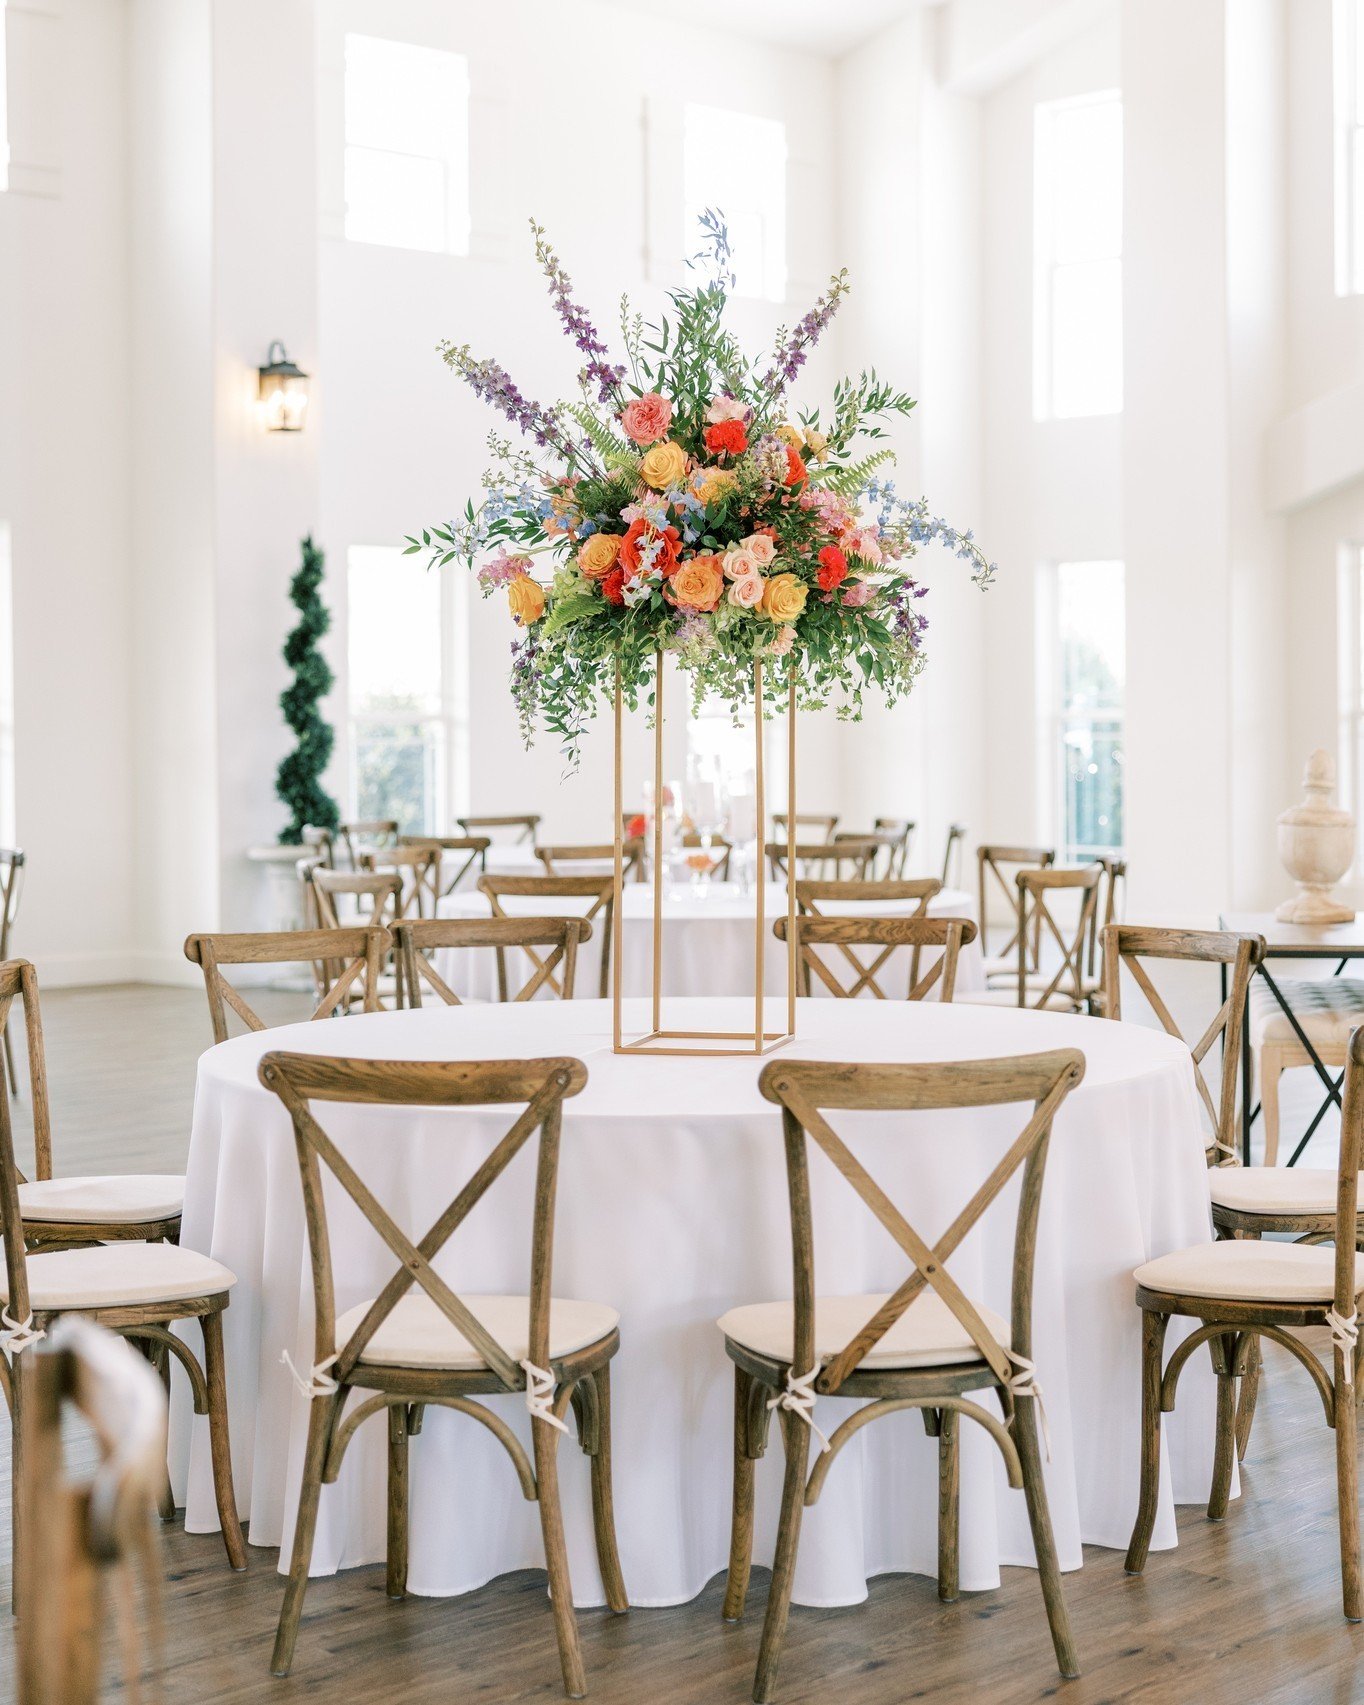 Summer is right around the corner and our feed is filling up with these beautiful bright florals, needless to say&hellip;we are in love!

Don&rsquo;t be afraid to add color to your wedding color palette at anytime of year! 

Want to see a bright vibr